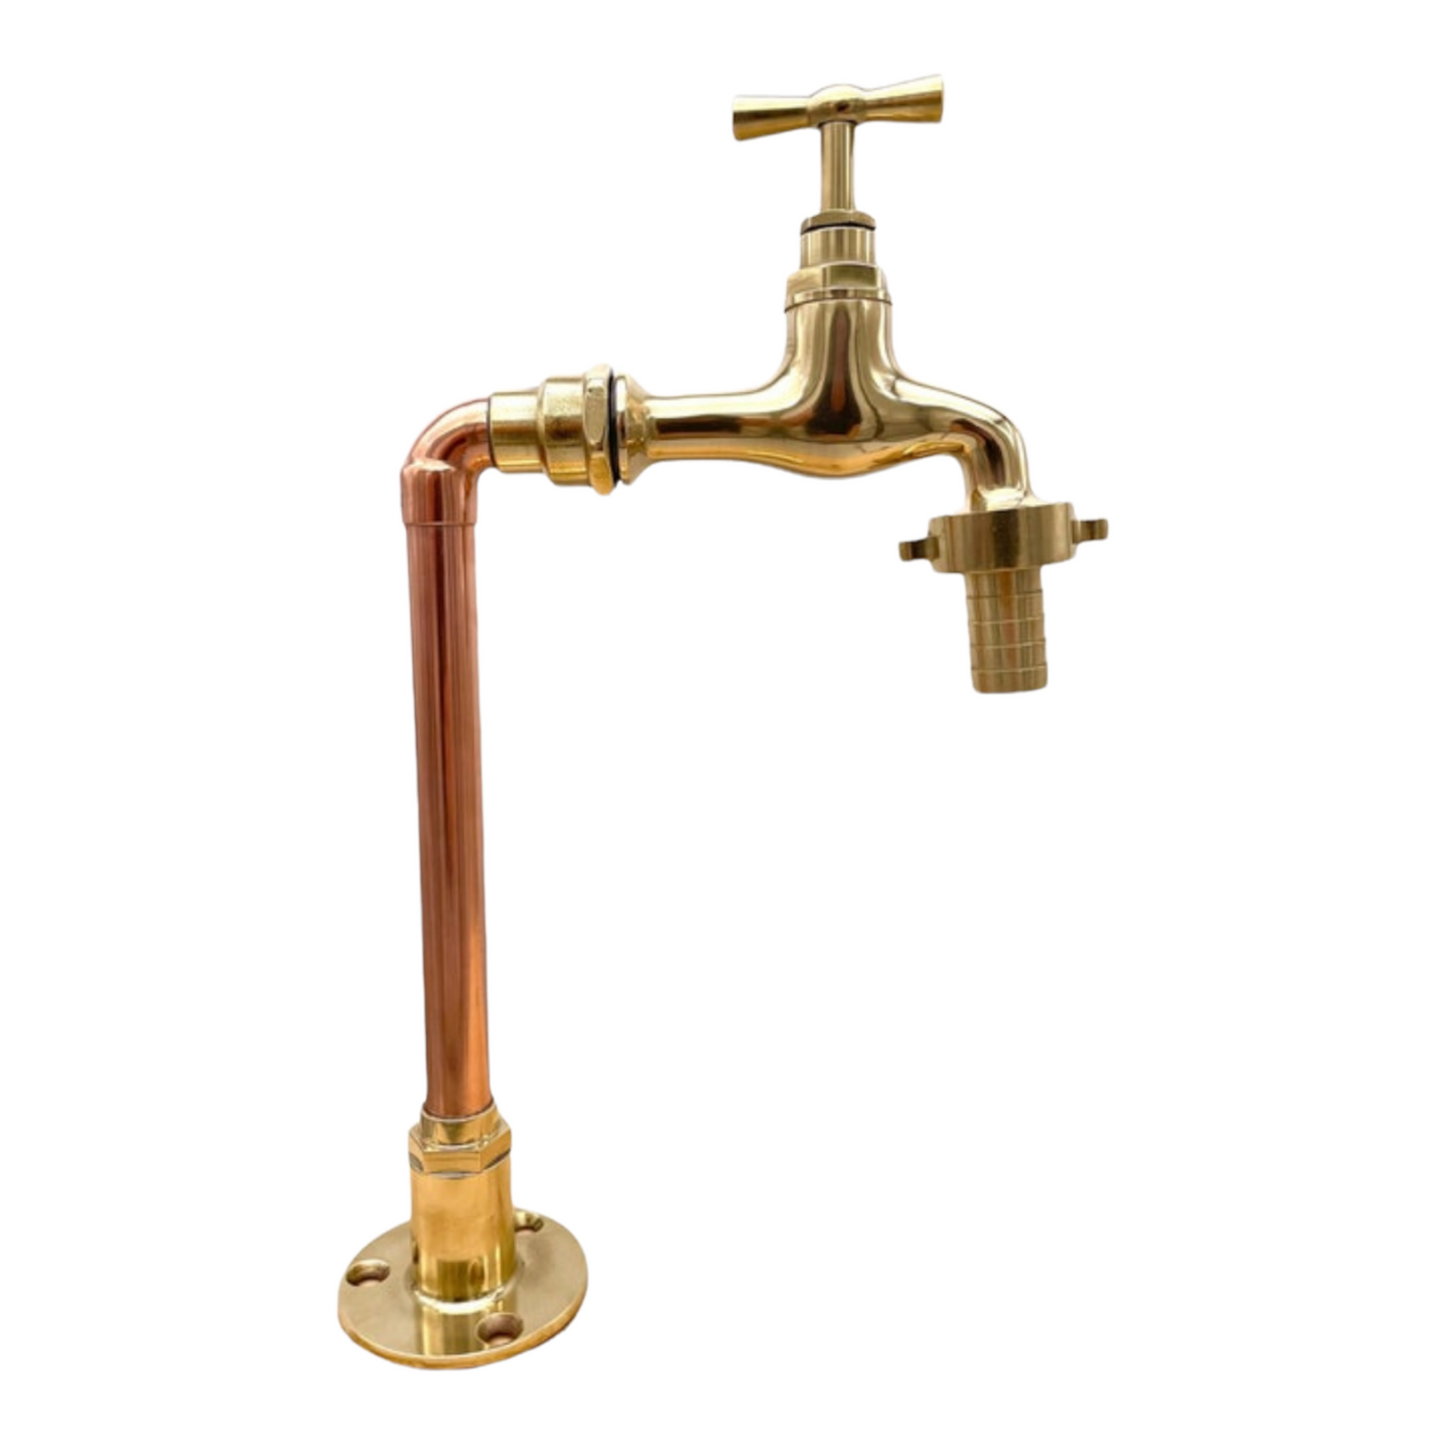 Image of a pair of copper and brass pillar taps  with nozzle